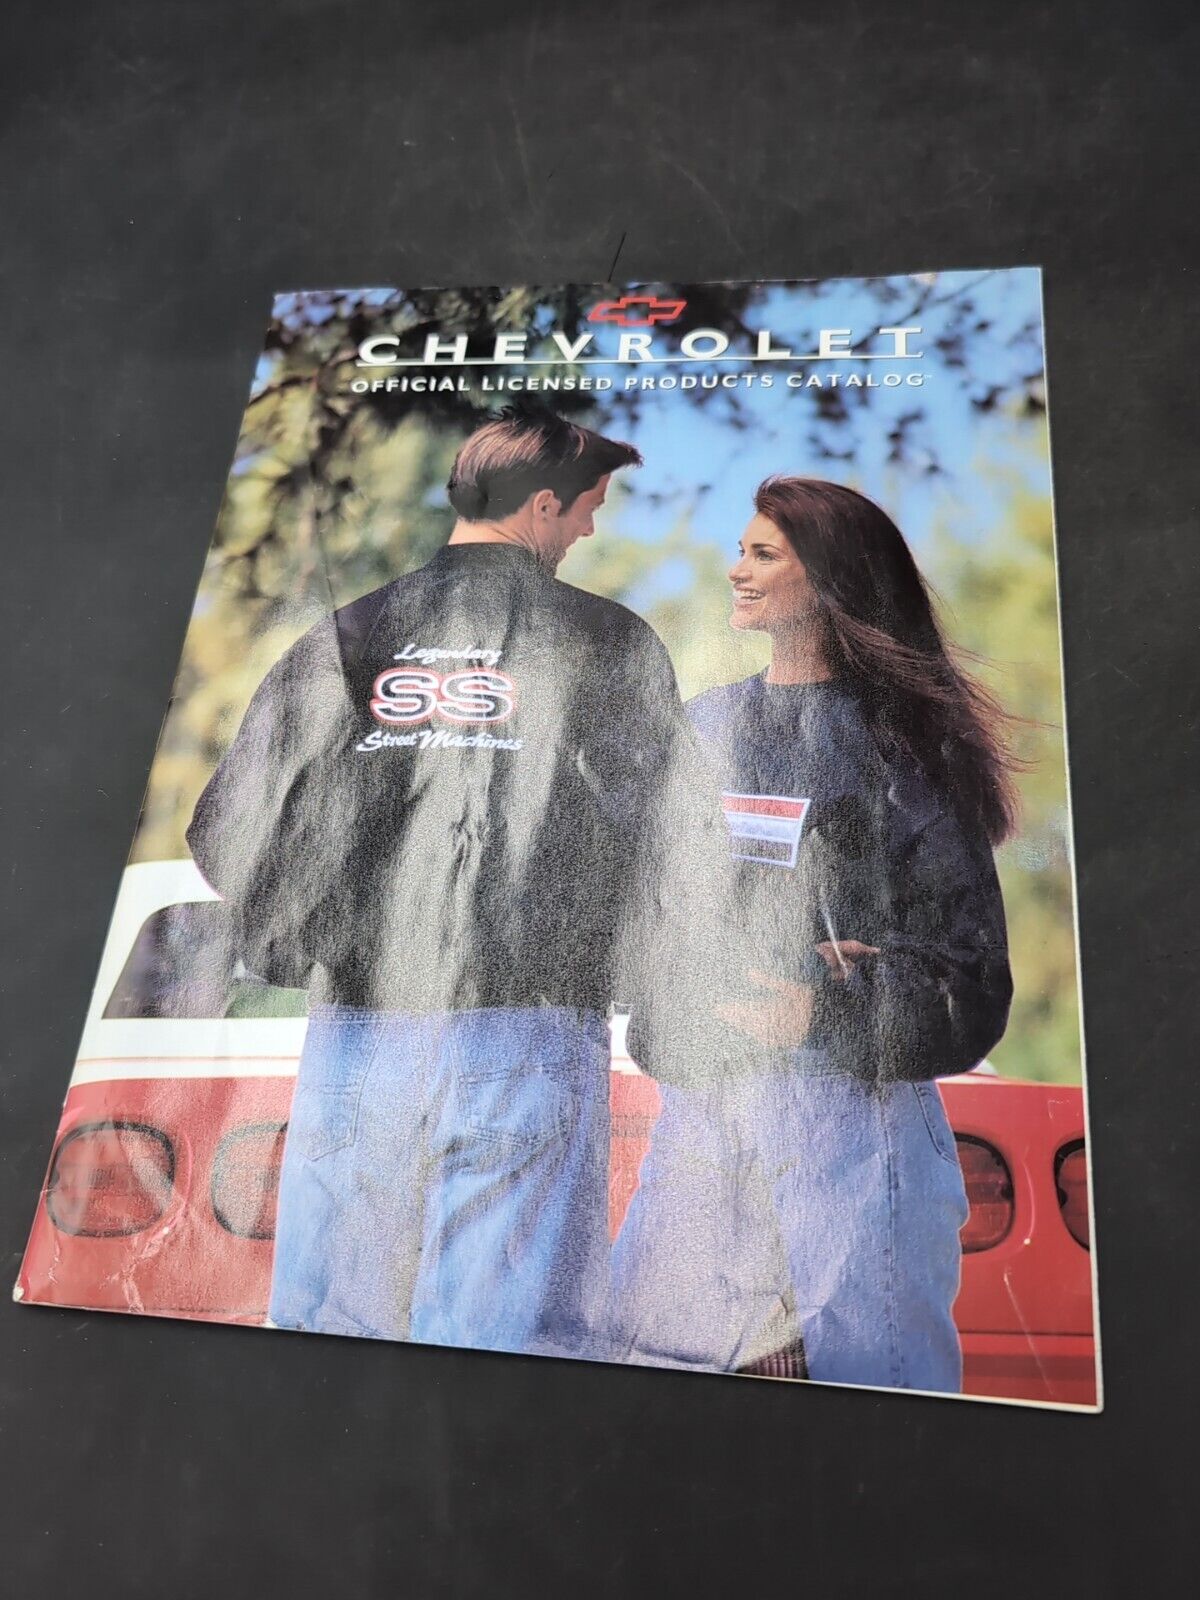 1996 Chevrolet Official Licensed Product Catalog Book